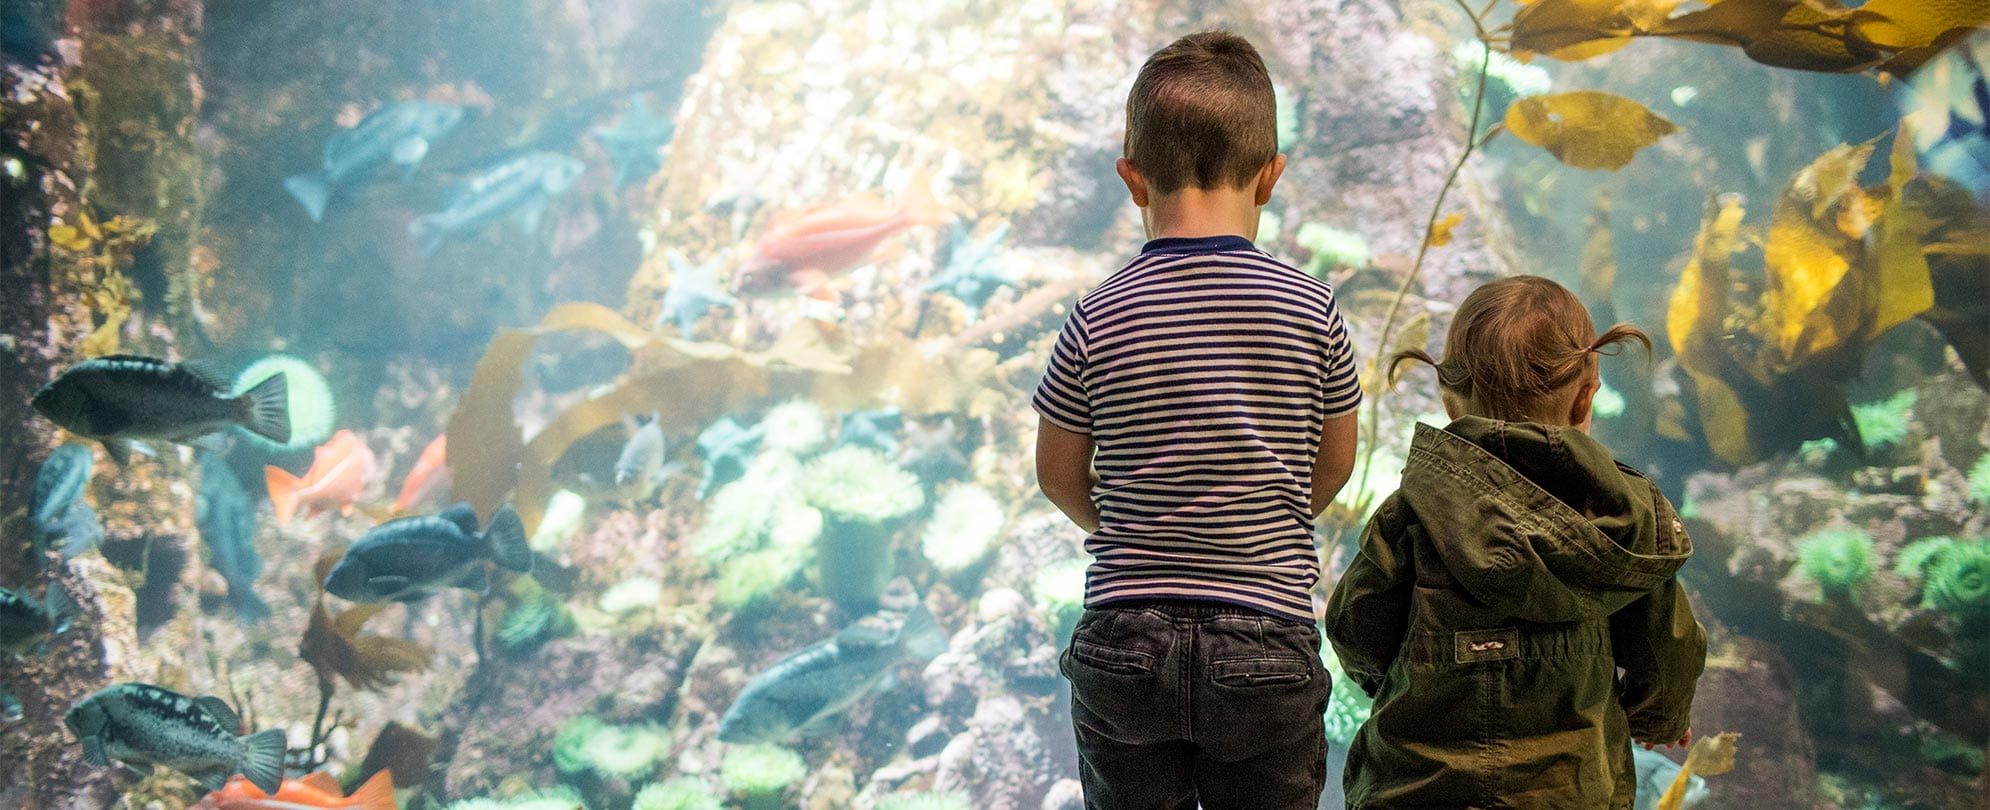 A little boy and girl both standing in front of a large fish tank at an aquarium.